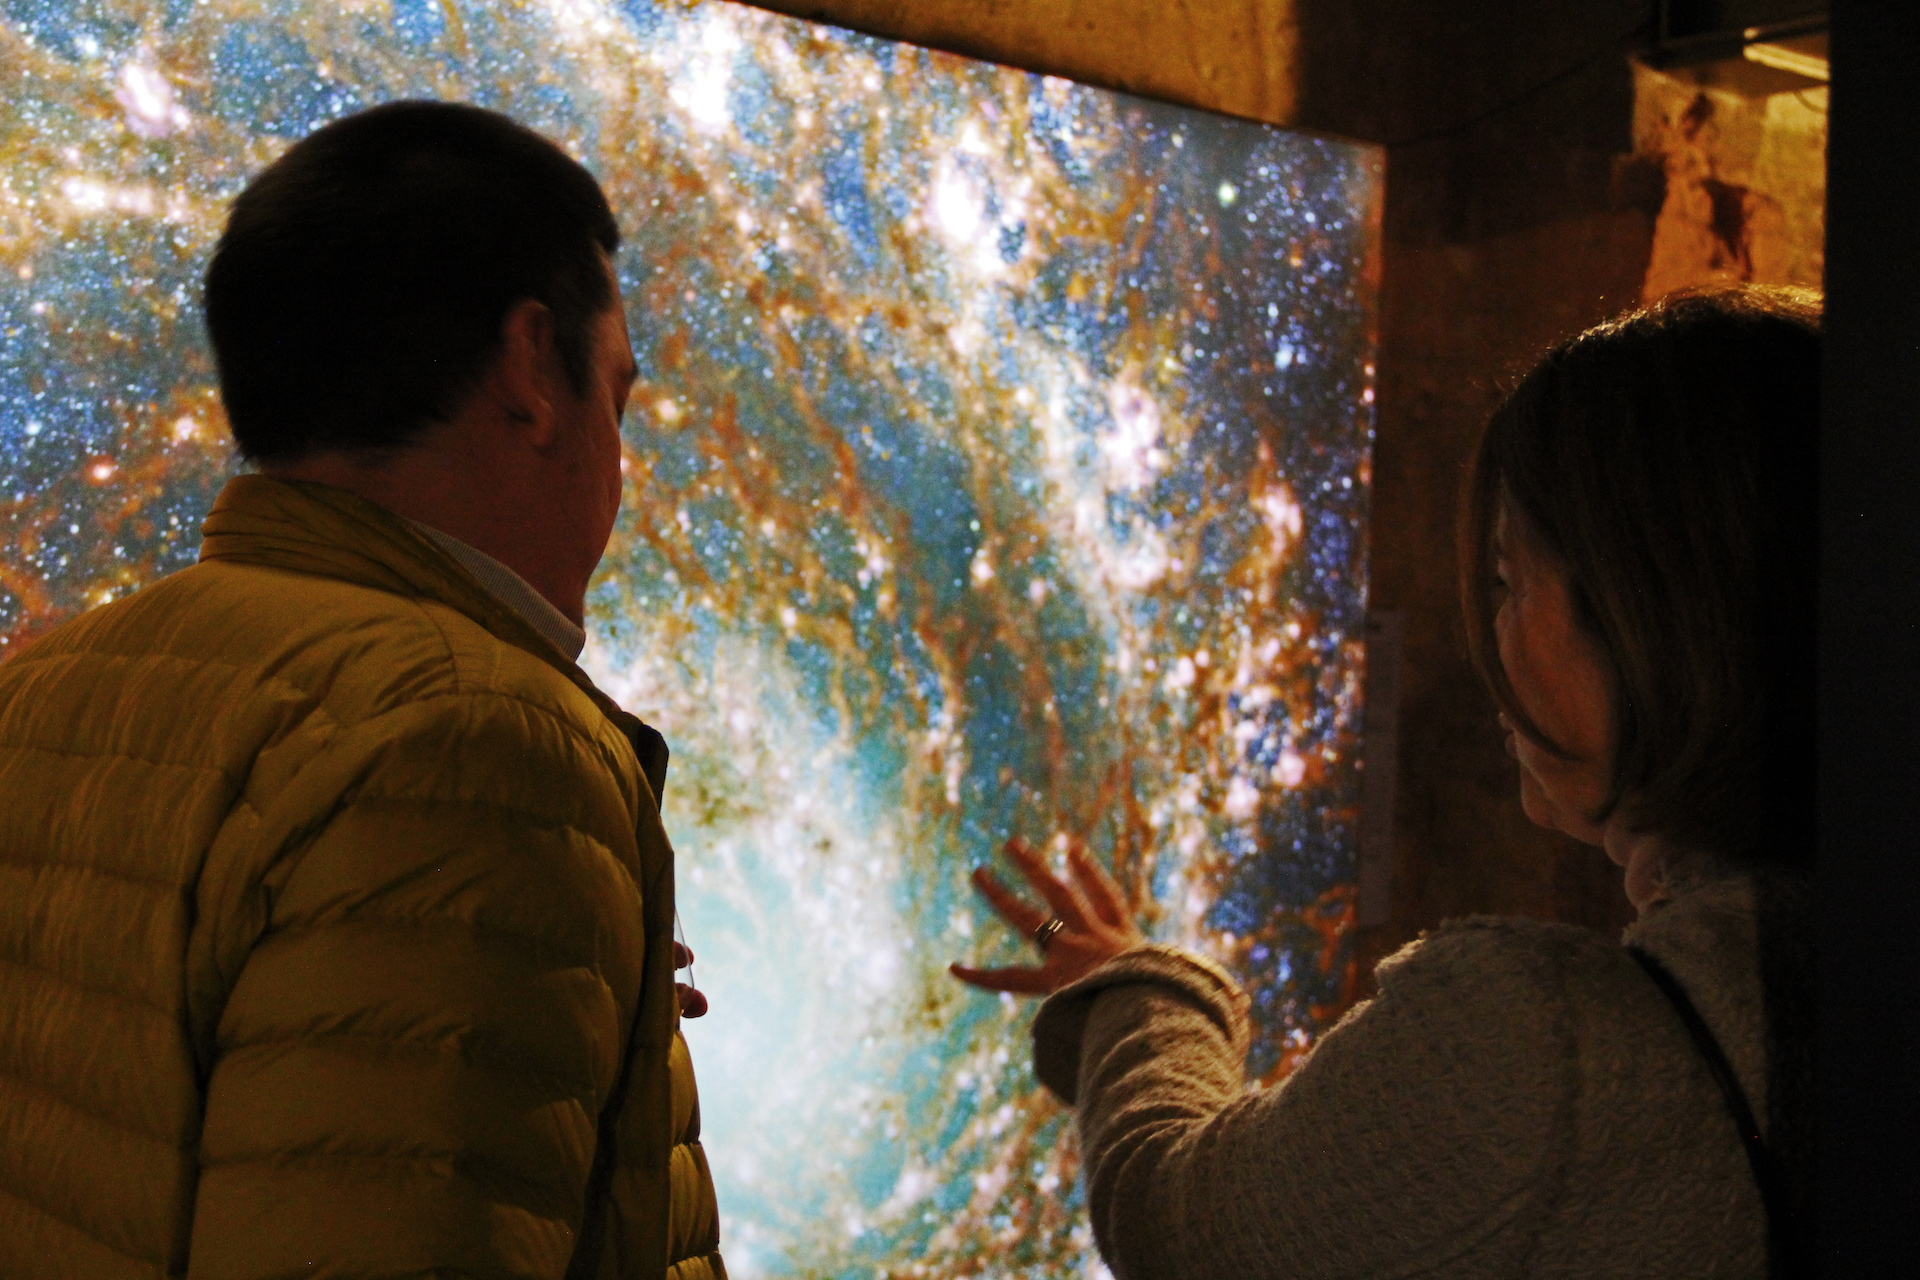 Two people looking at an image of a galaxy